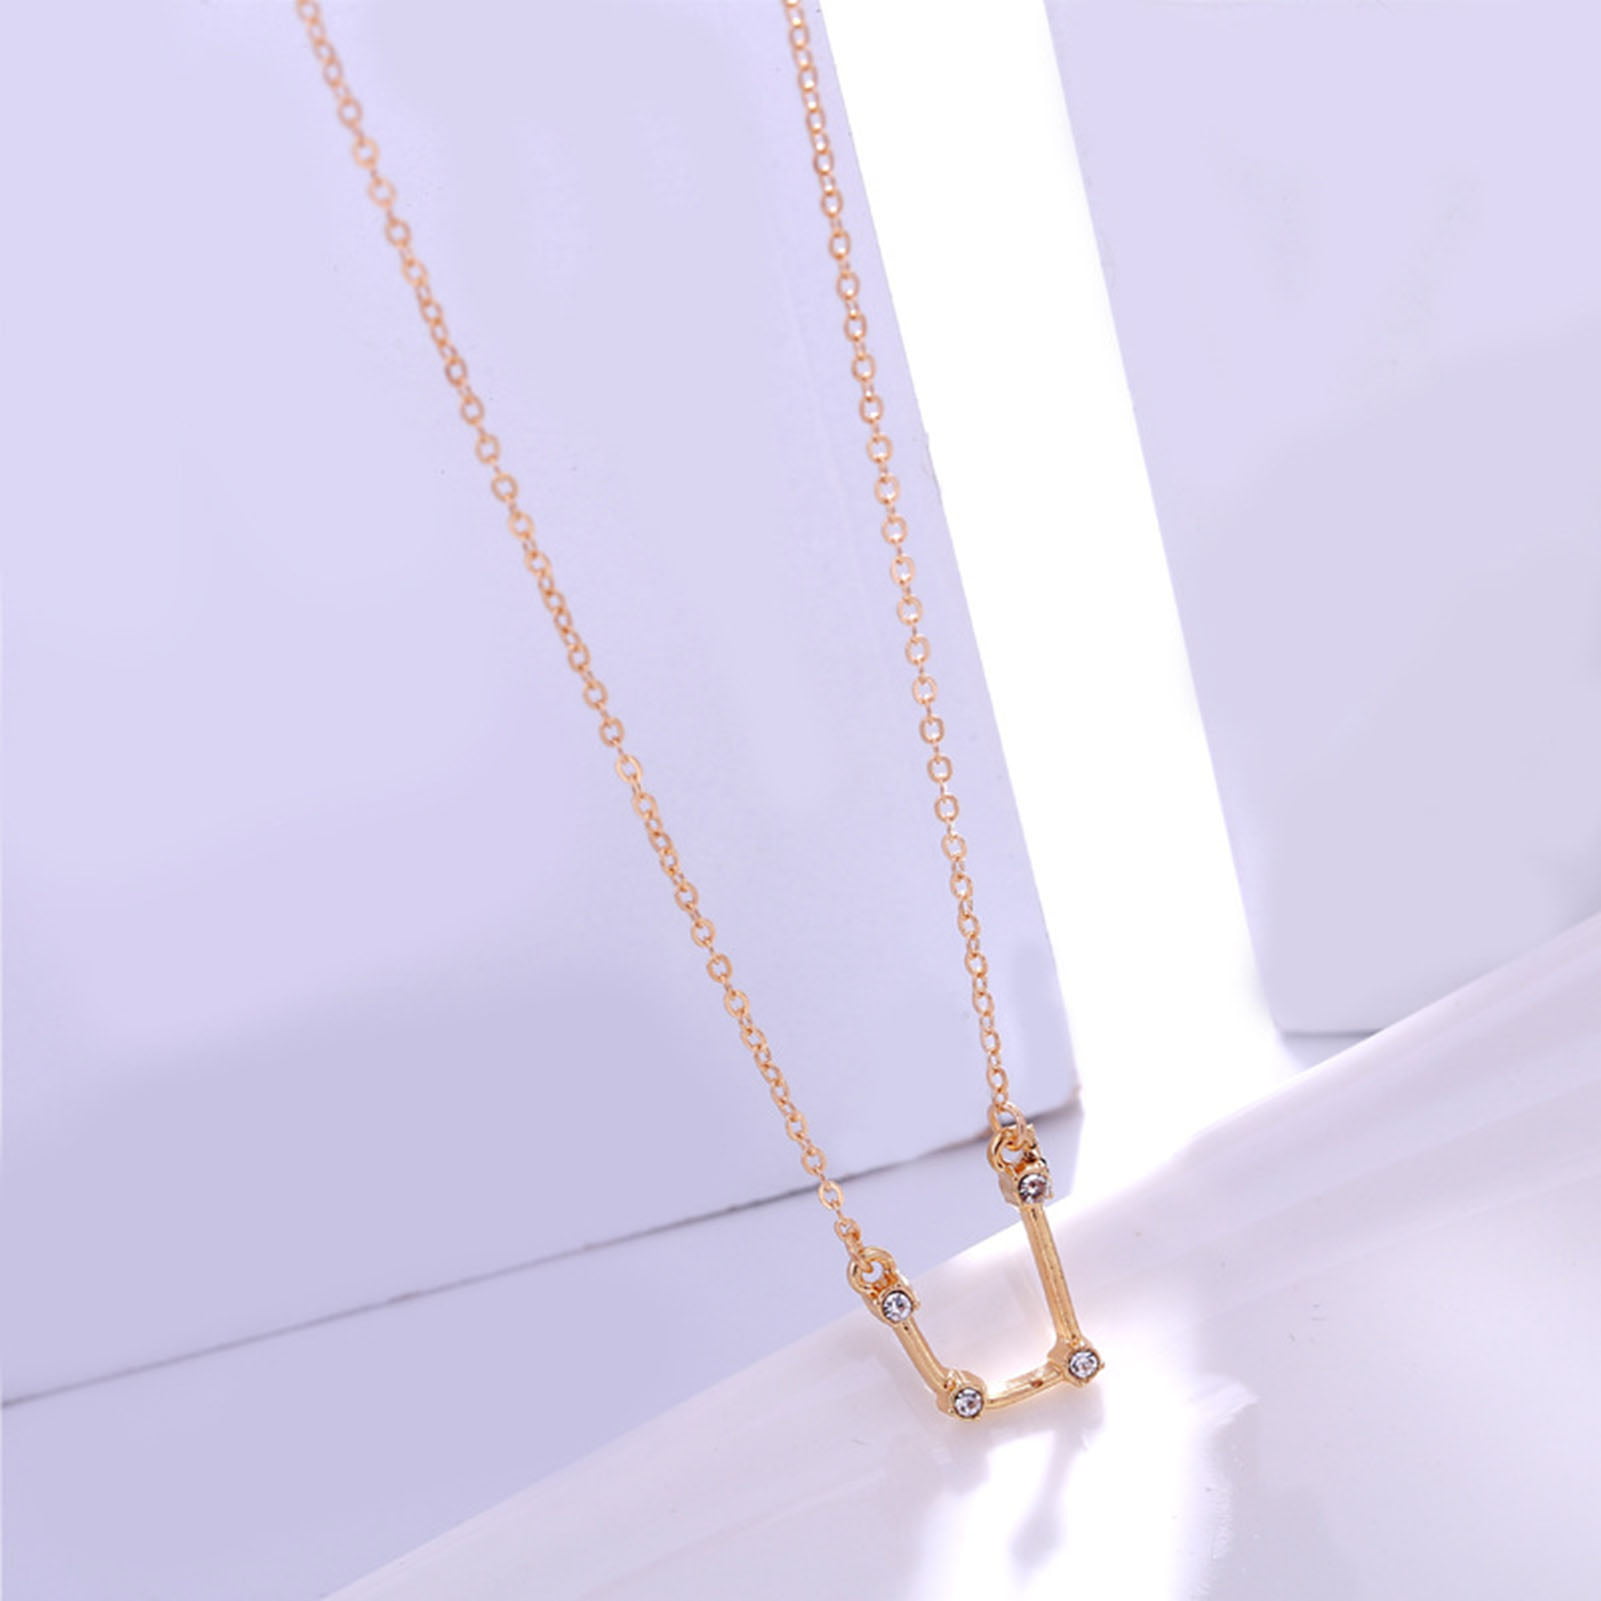 Width 1.3mm Details about   14K Yellow Gold Adjustable Popcorn Link Chain Lenght 22 Inch 